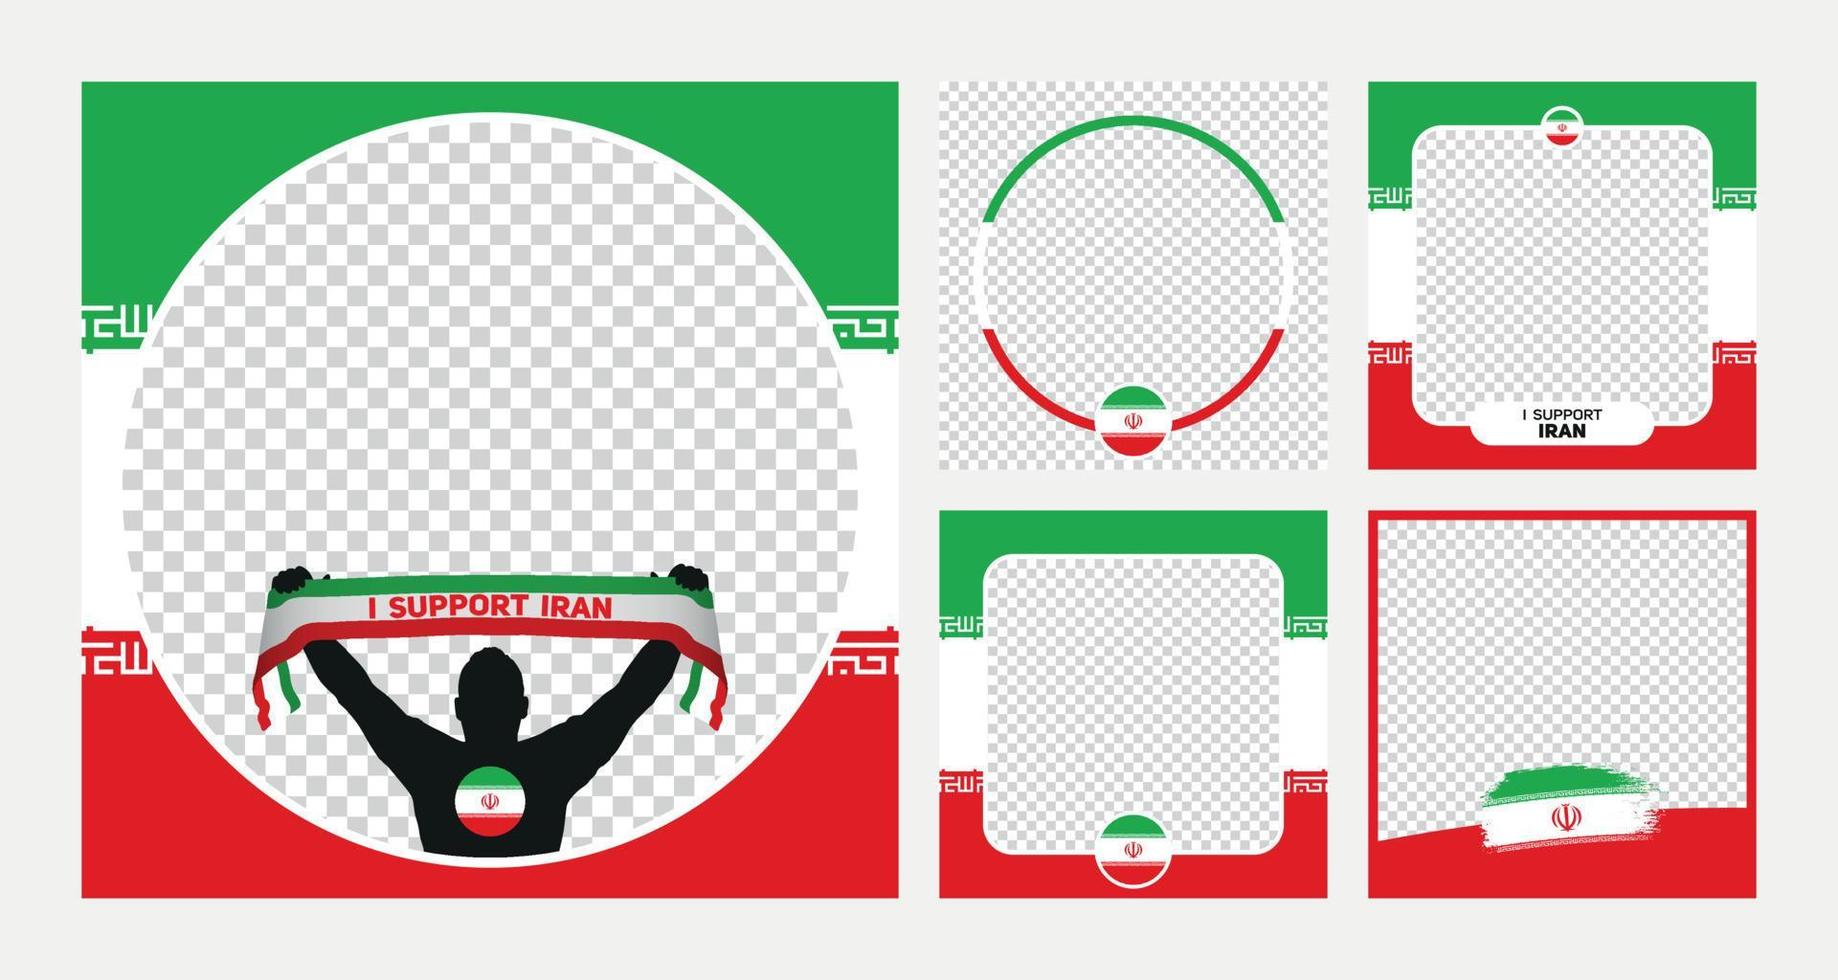 I support Iran world football championship profil picture frame banners for social media vector